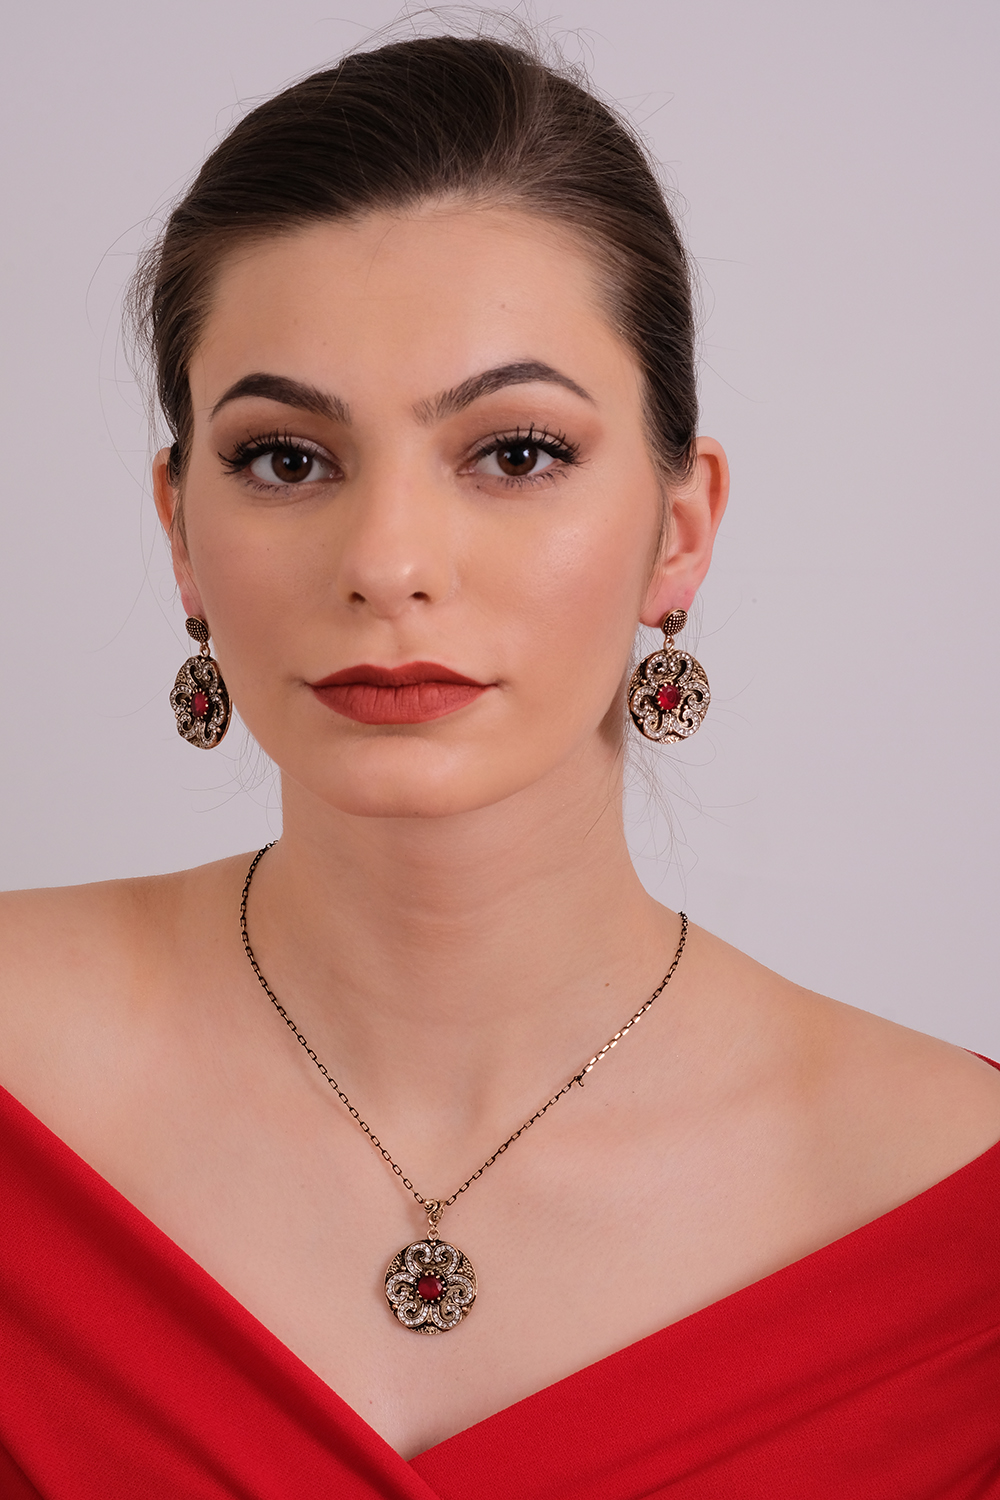 MATHIAS Necklace and Earrings Jewelry Set